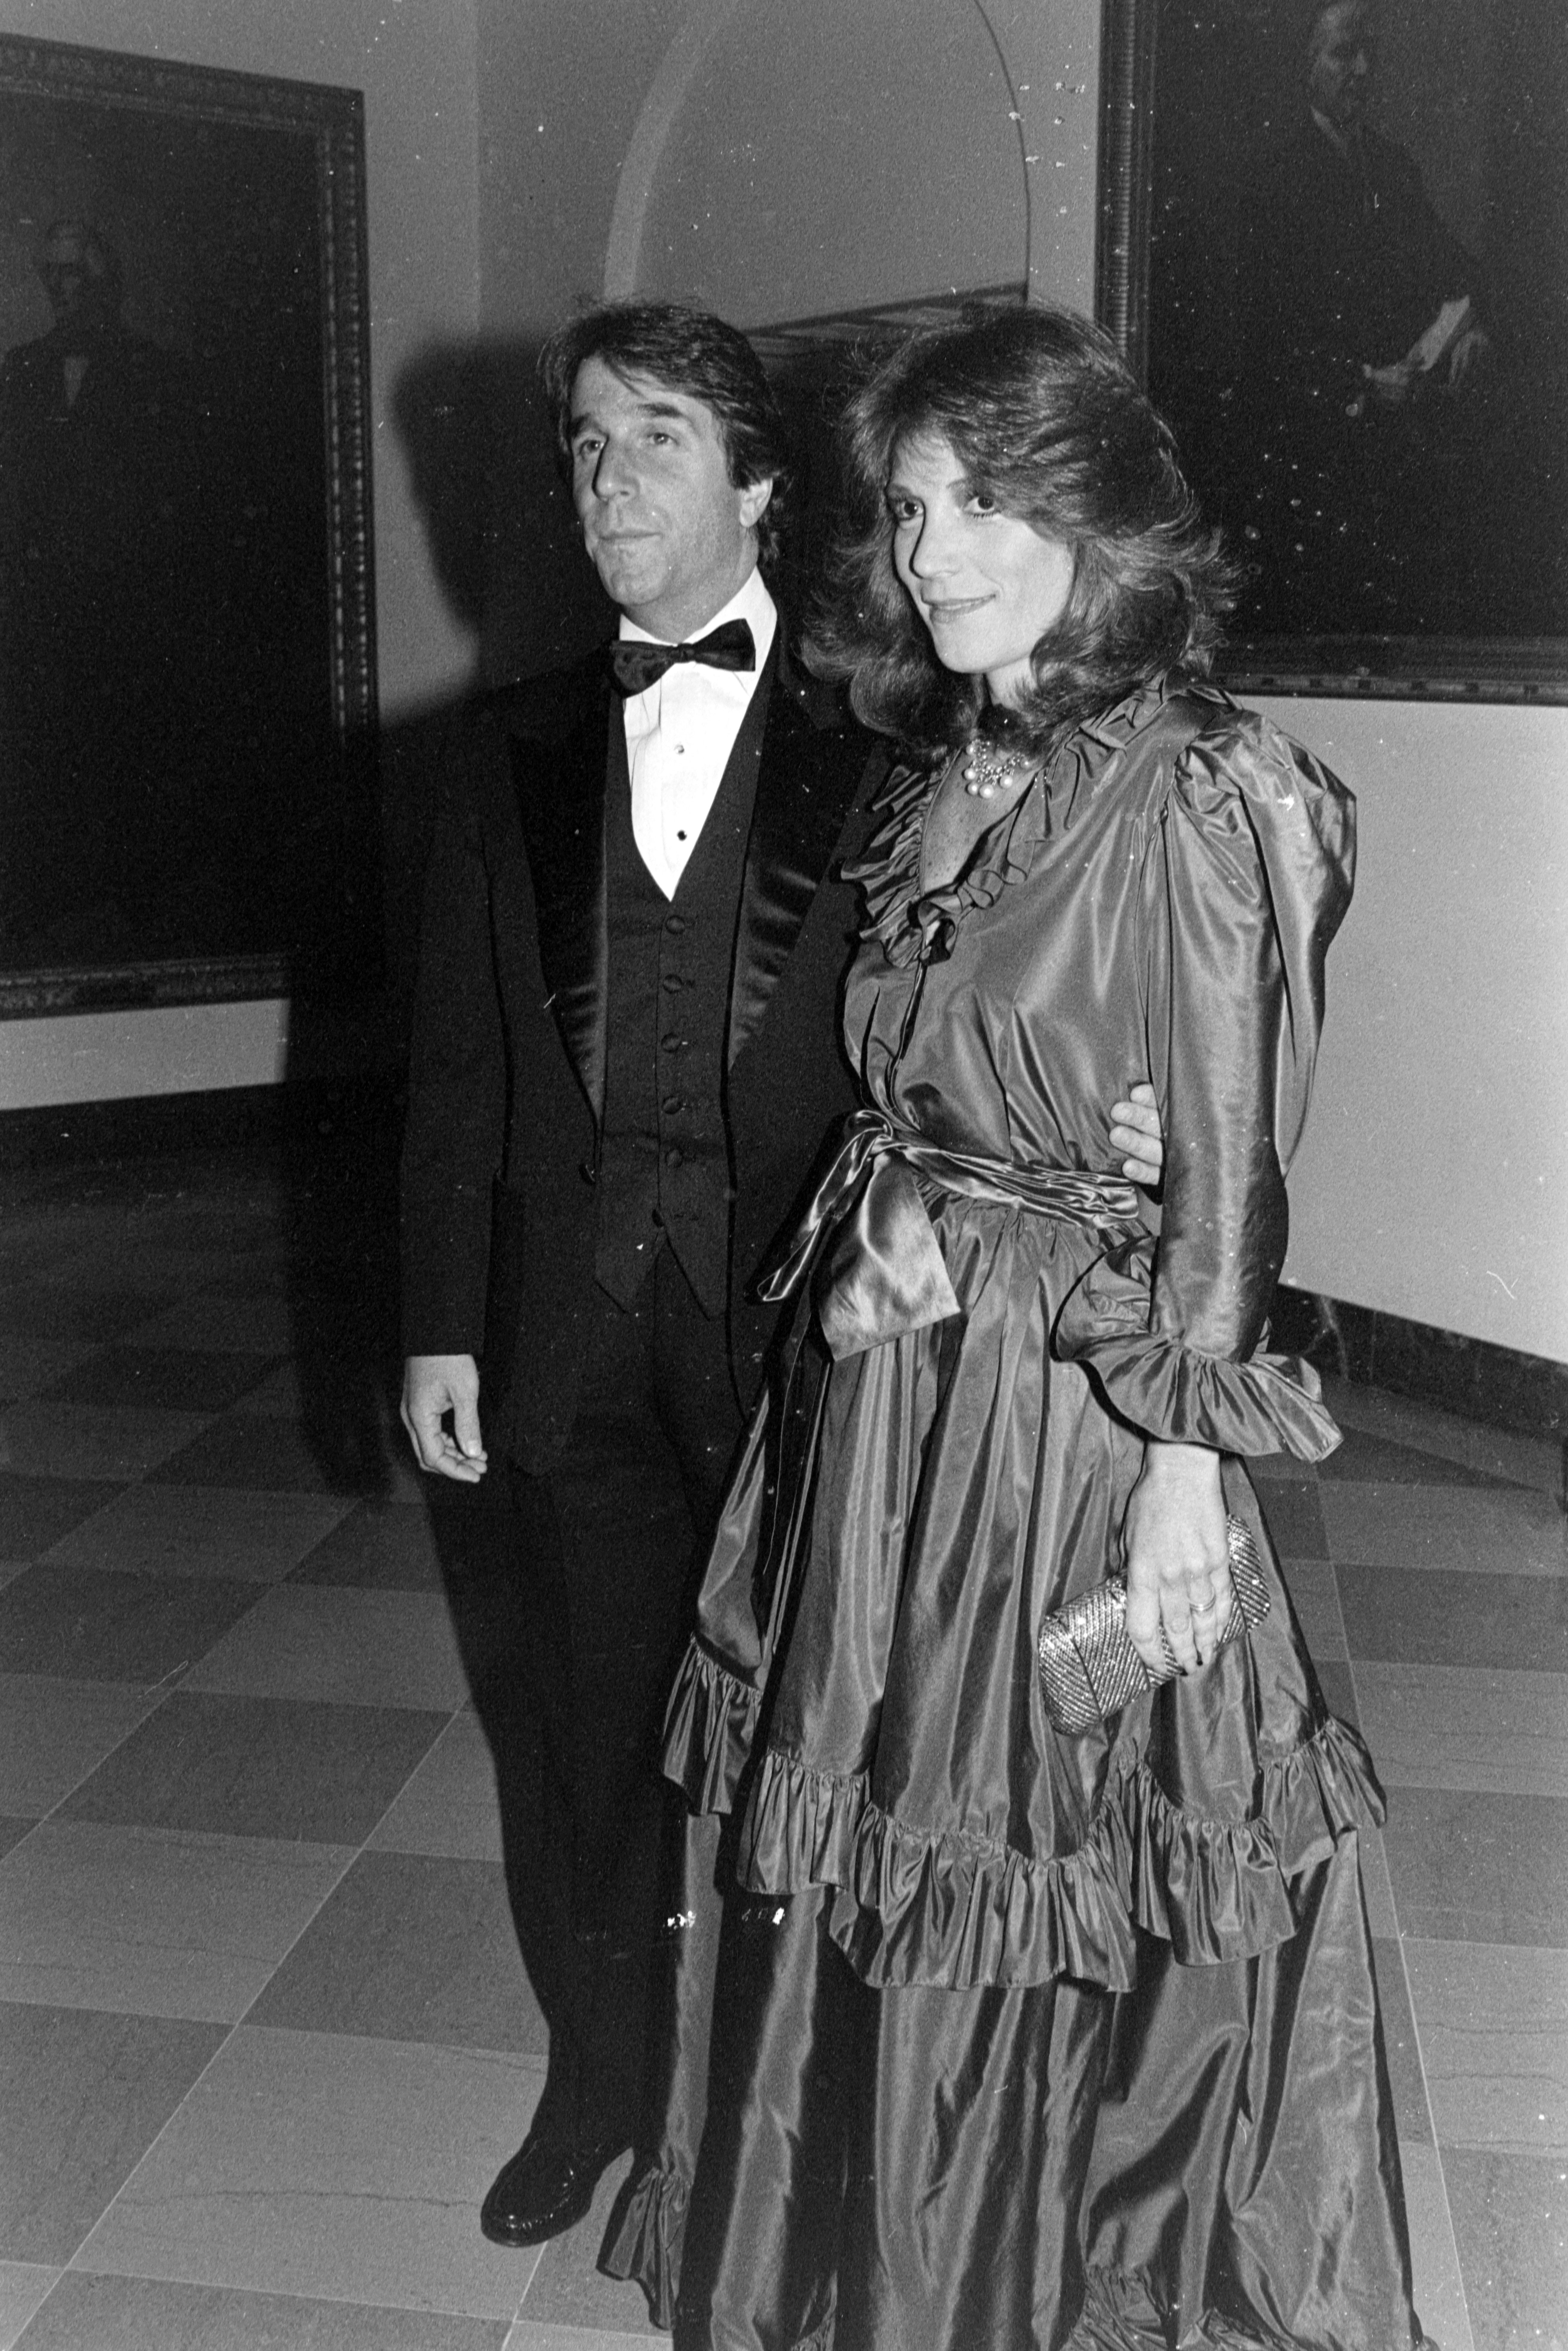 Henry Winkler and Stacey Weitzman at a White House event in Washington, D.C., on November 16, 1984 | Source: Getty Images